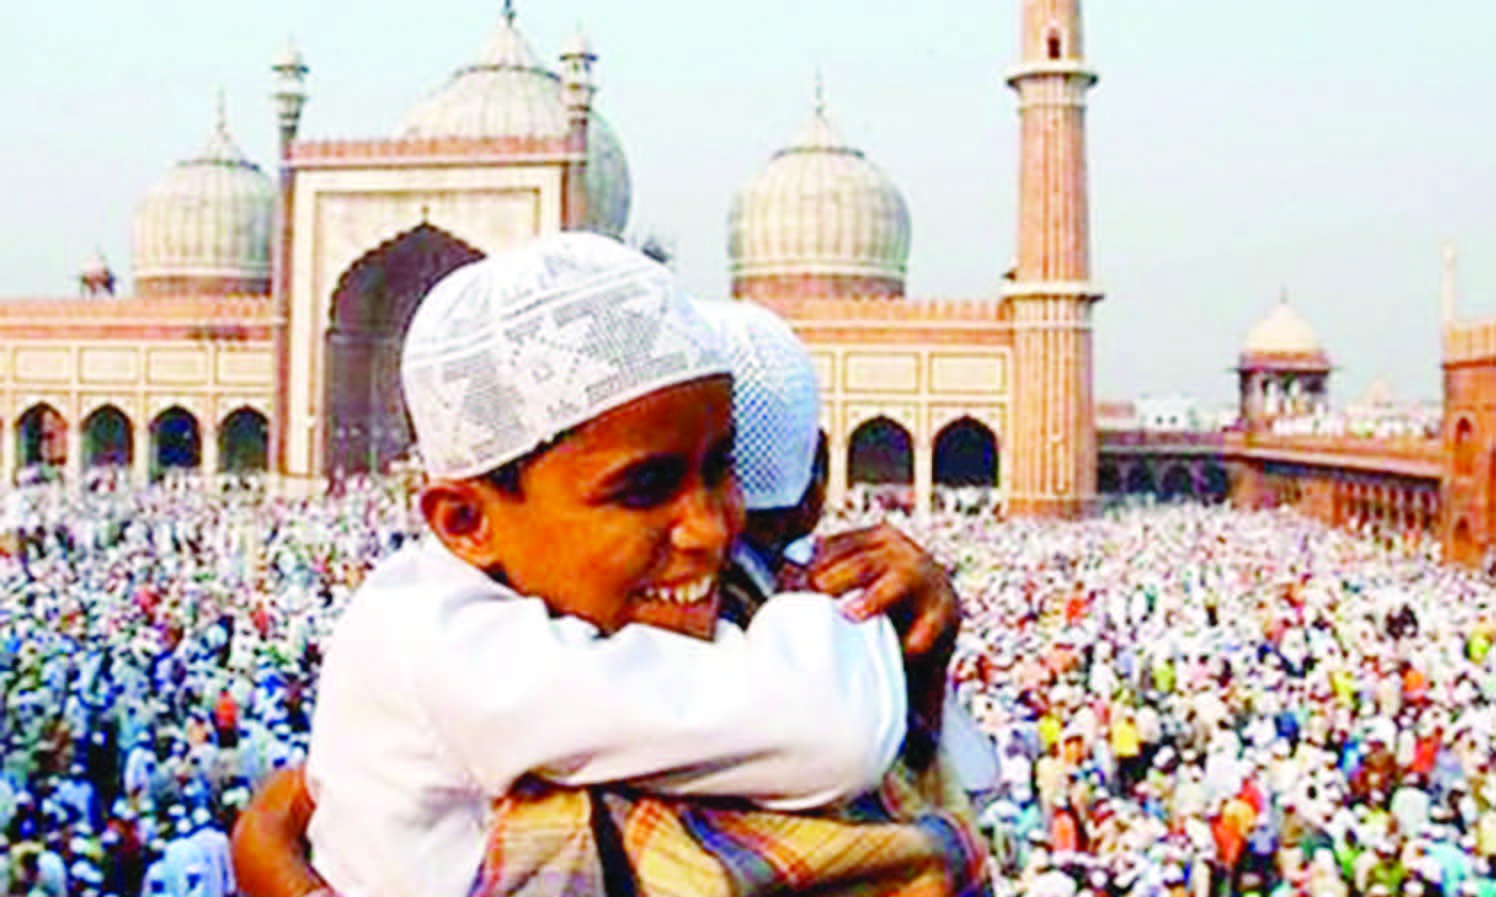 Eid al-fitr is being observed in North America on Wednesday, July 6